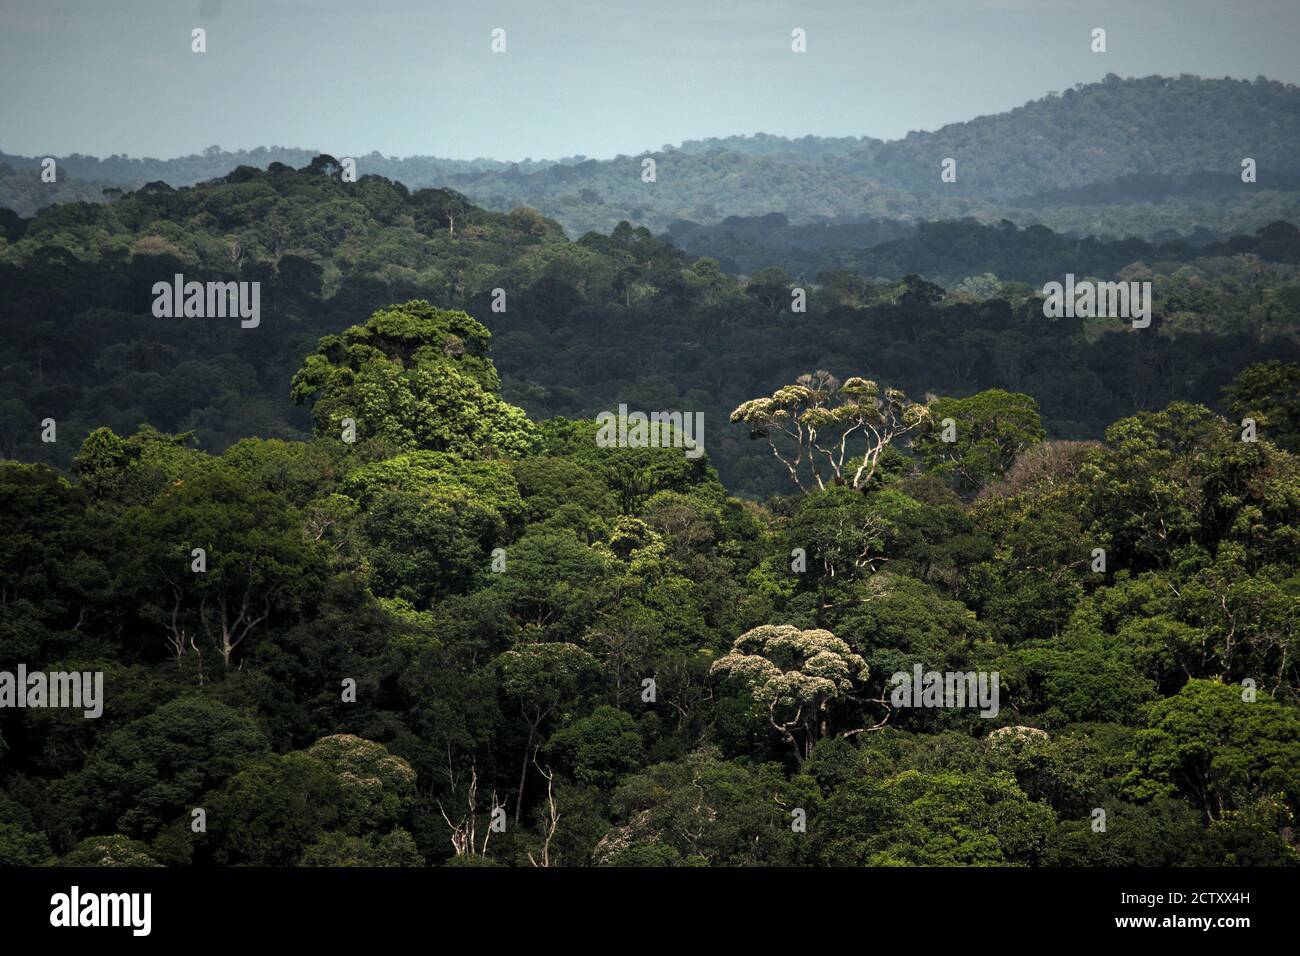 View of the rainforest canopee from a high standpoint. Stock Photo